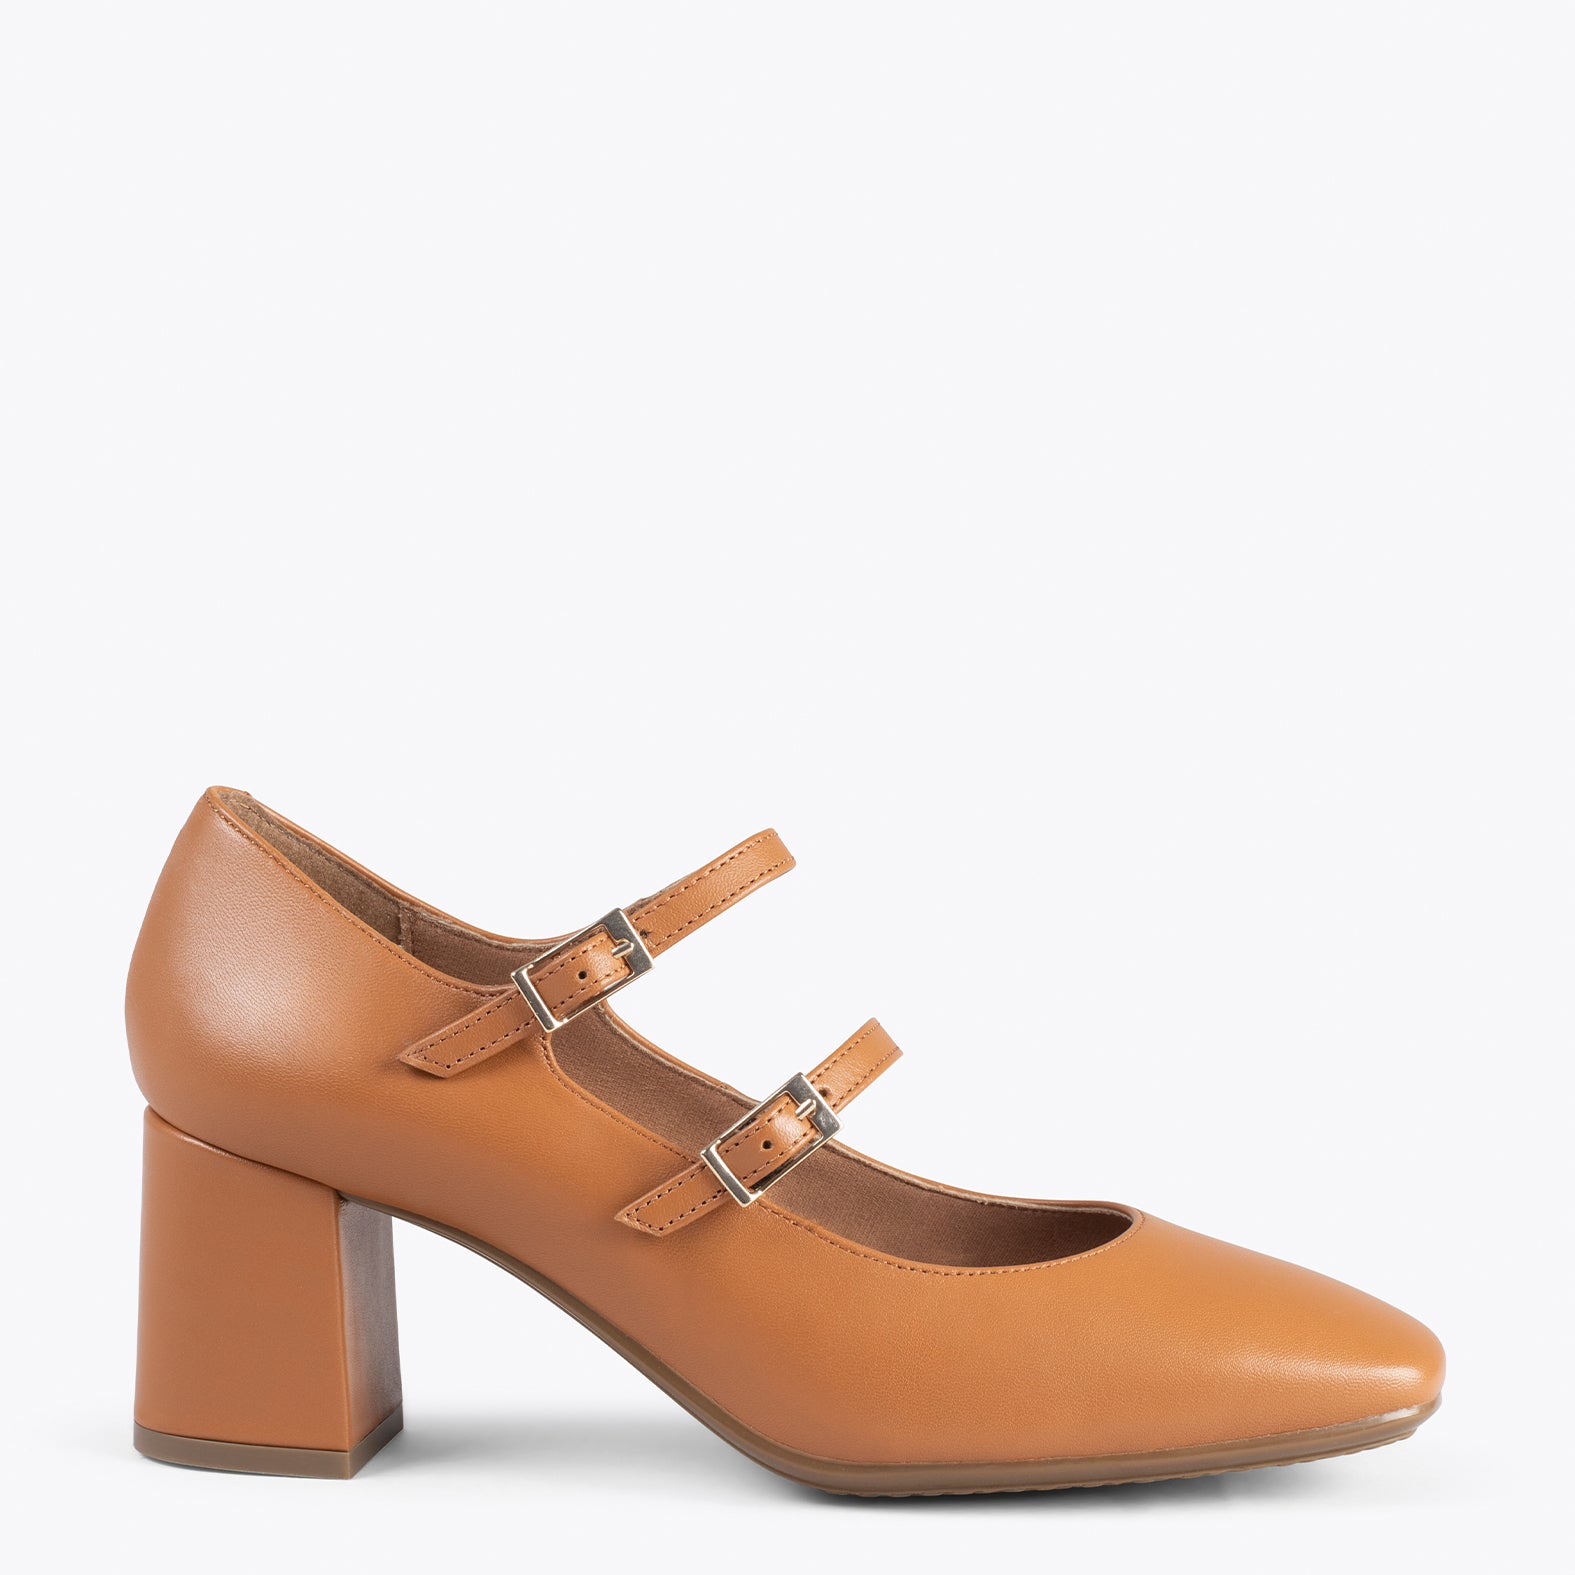 FEBRIS – CAMEL nappa leather heel with straps